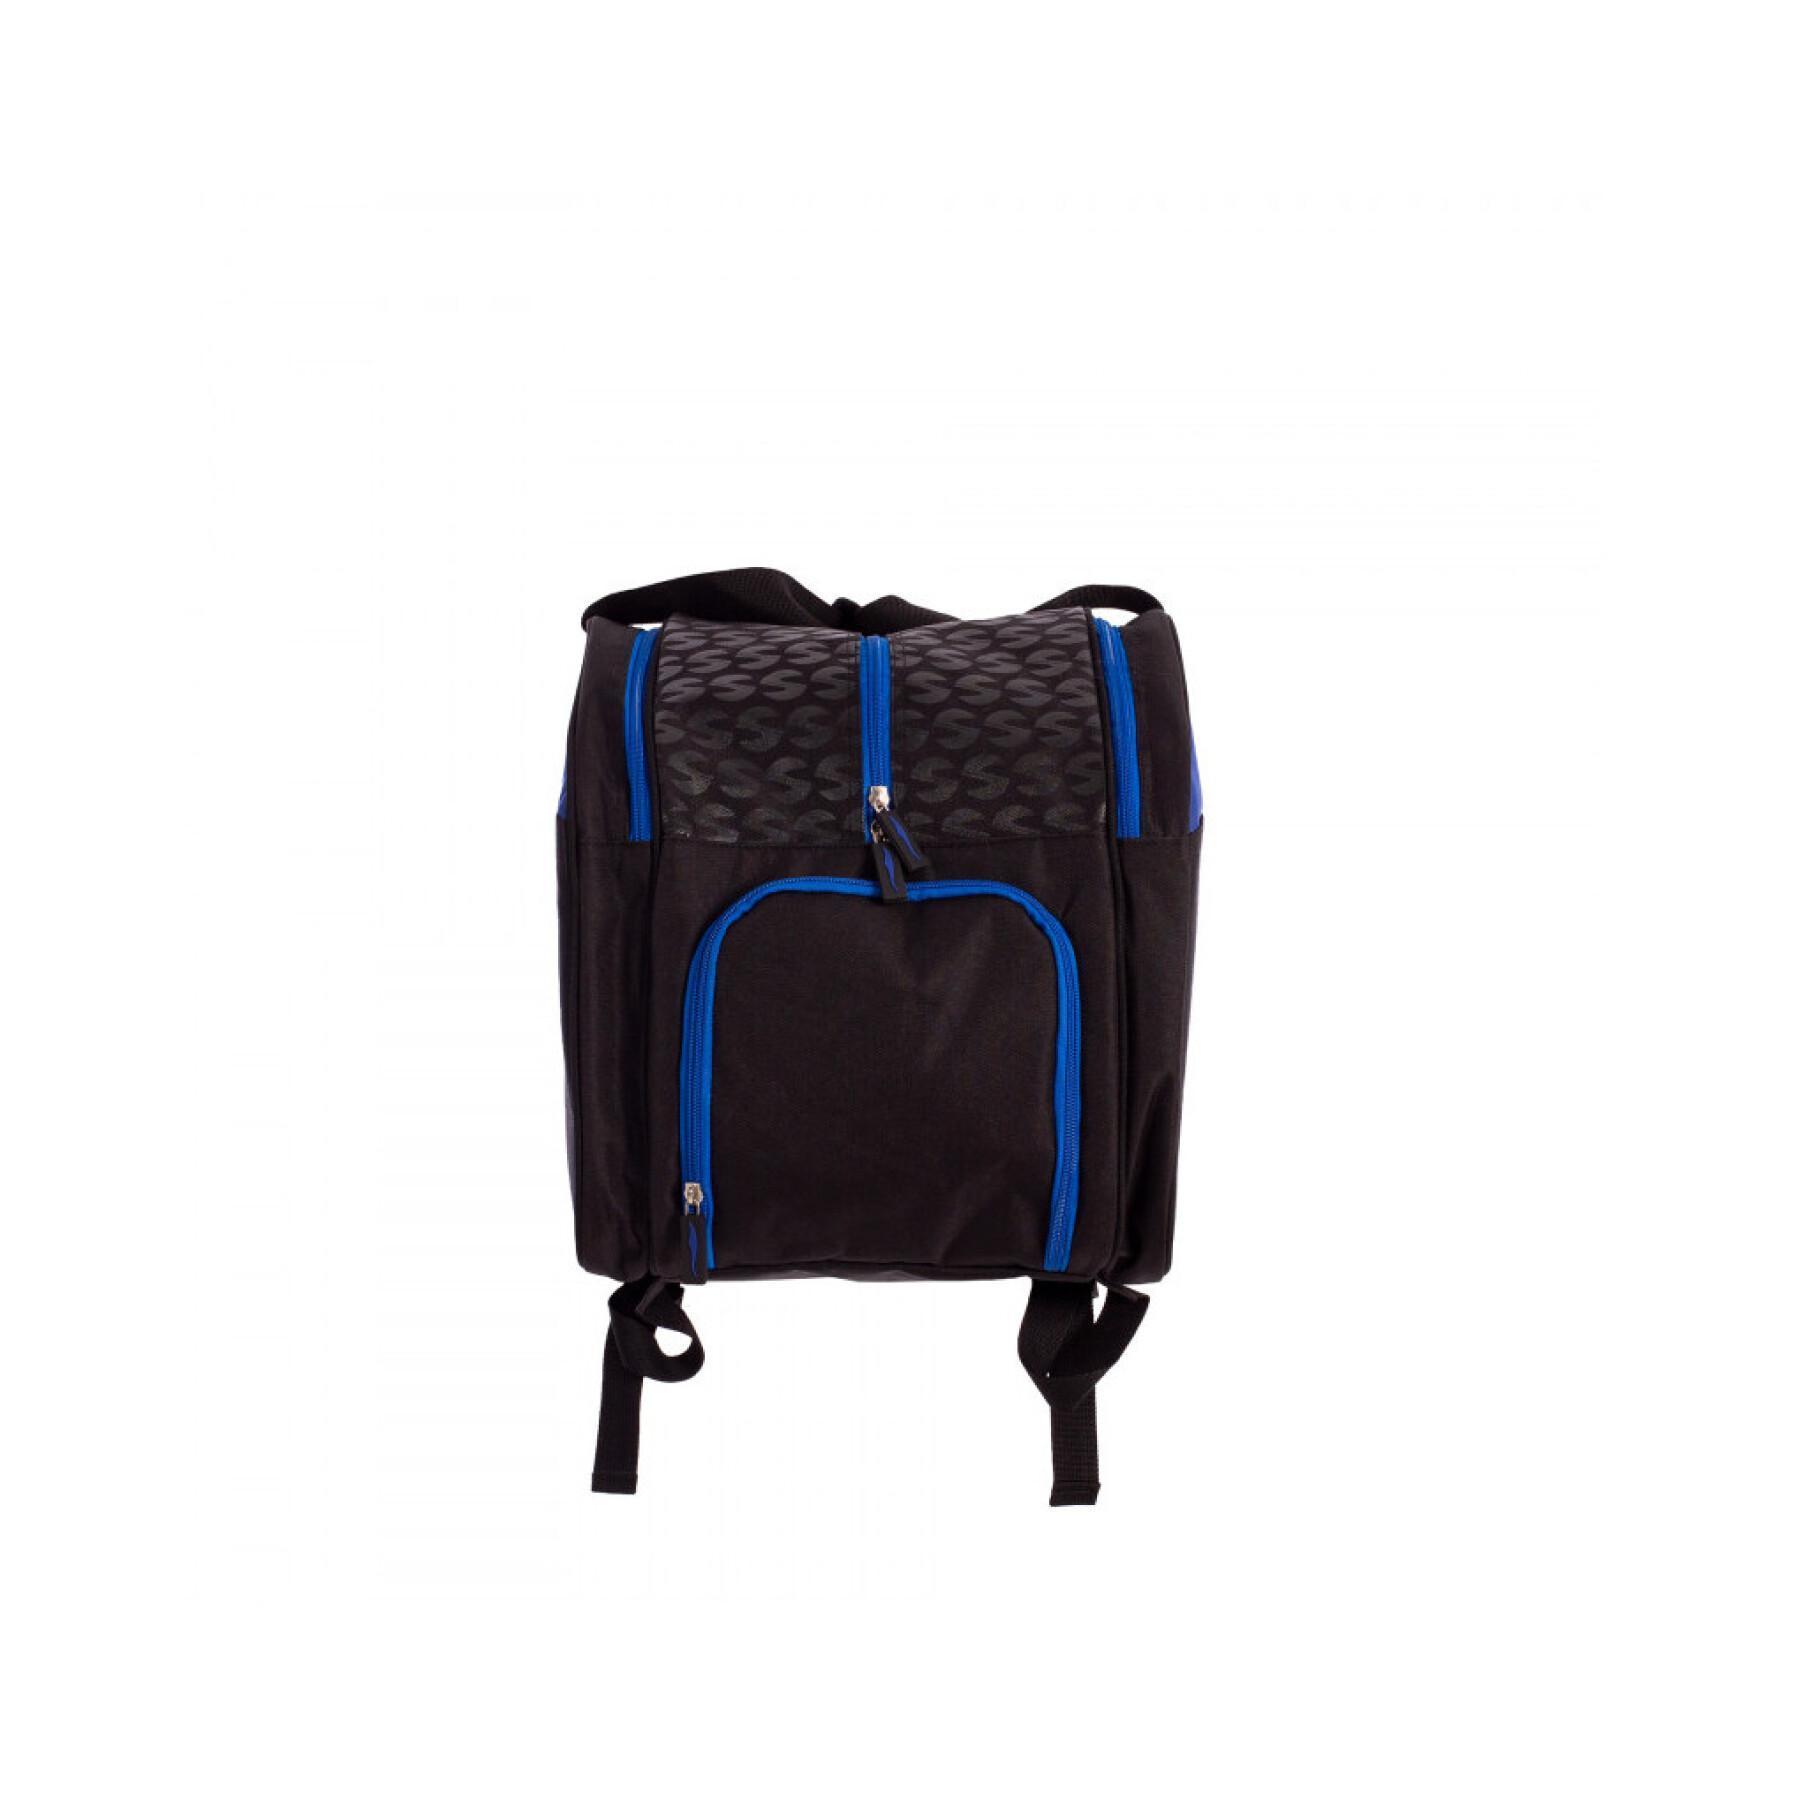 Racket bag from padel Softee Extra Cool Plus 2.0